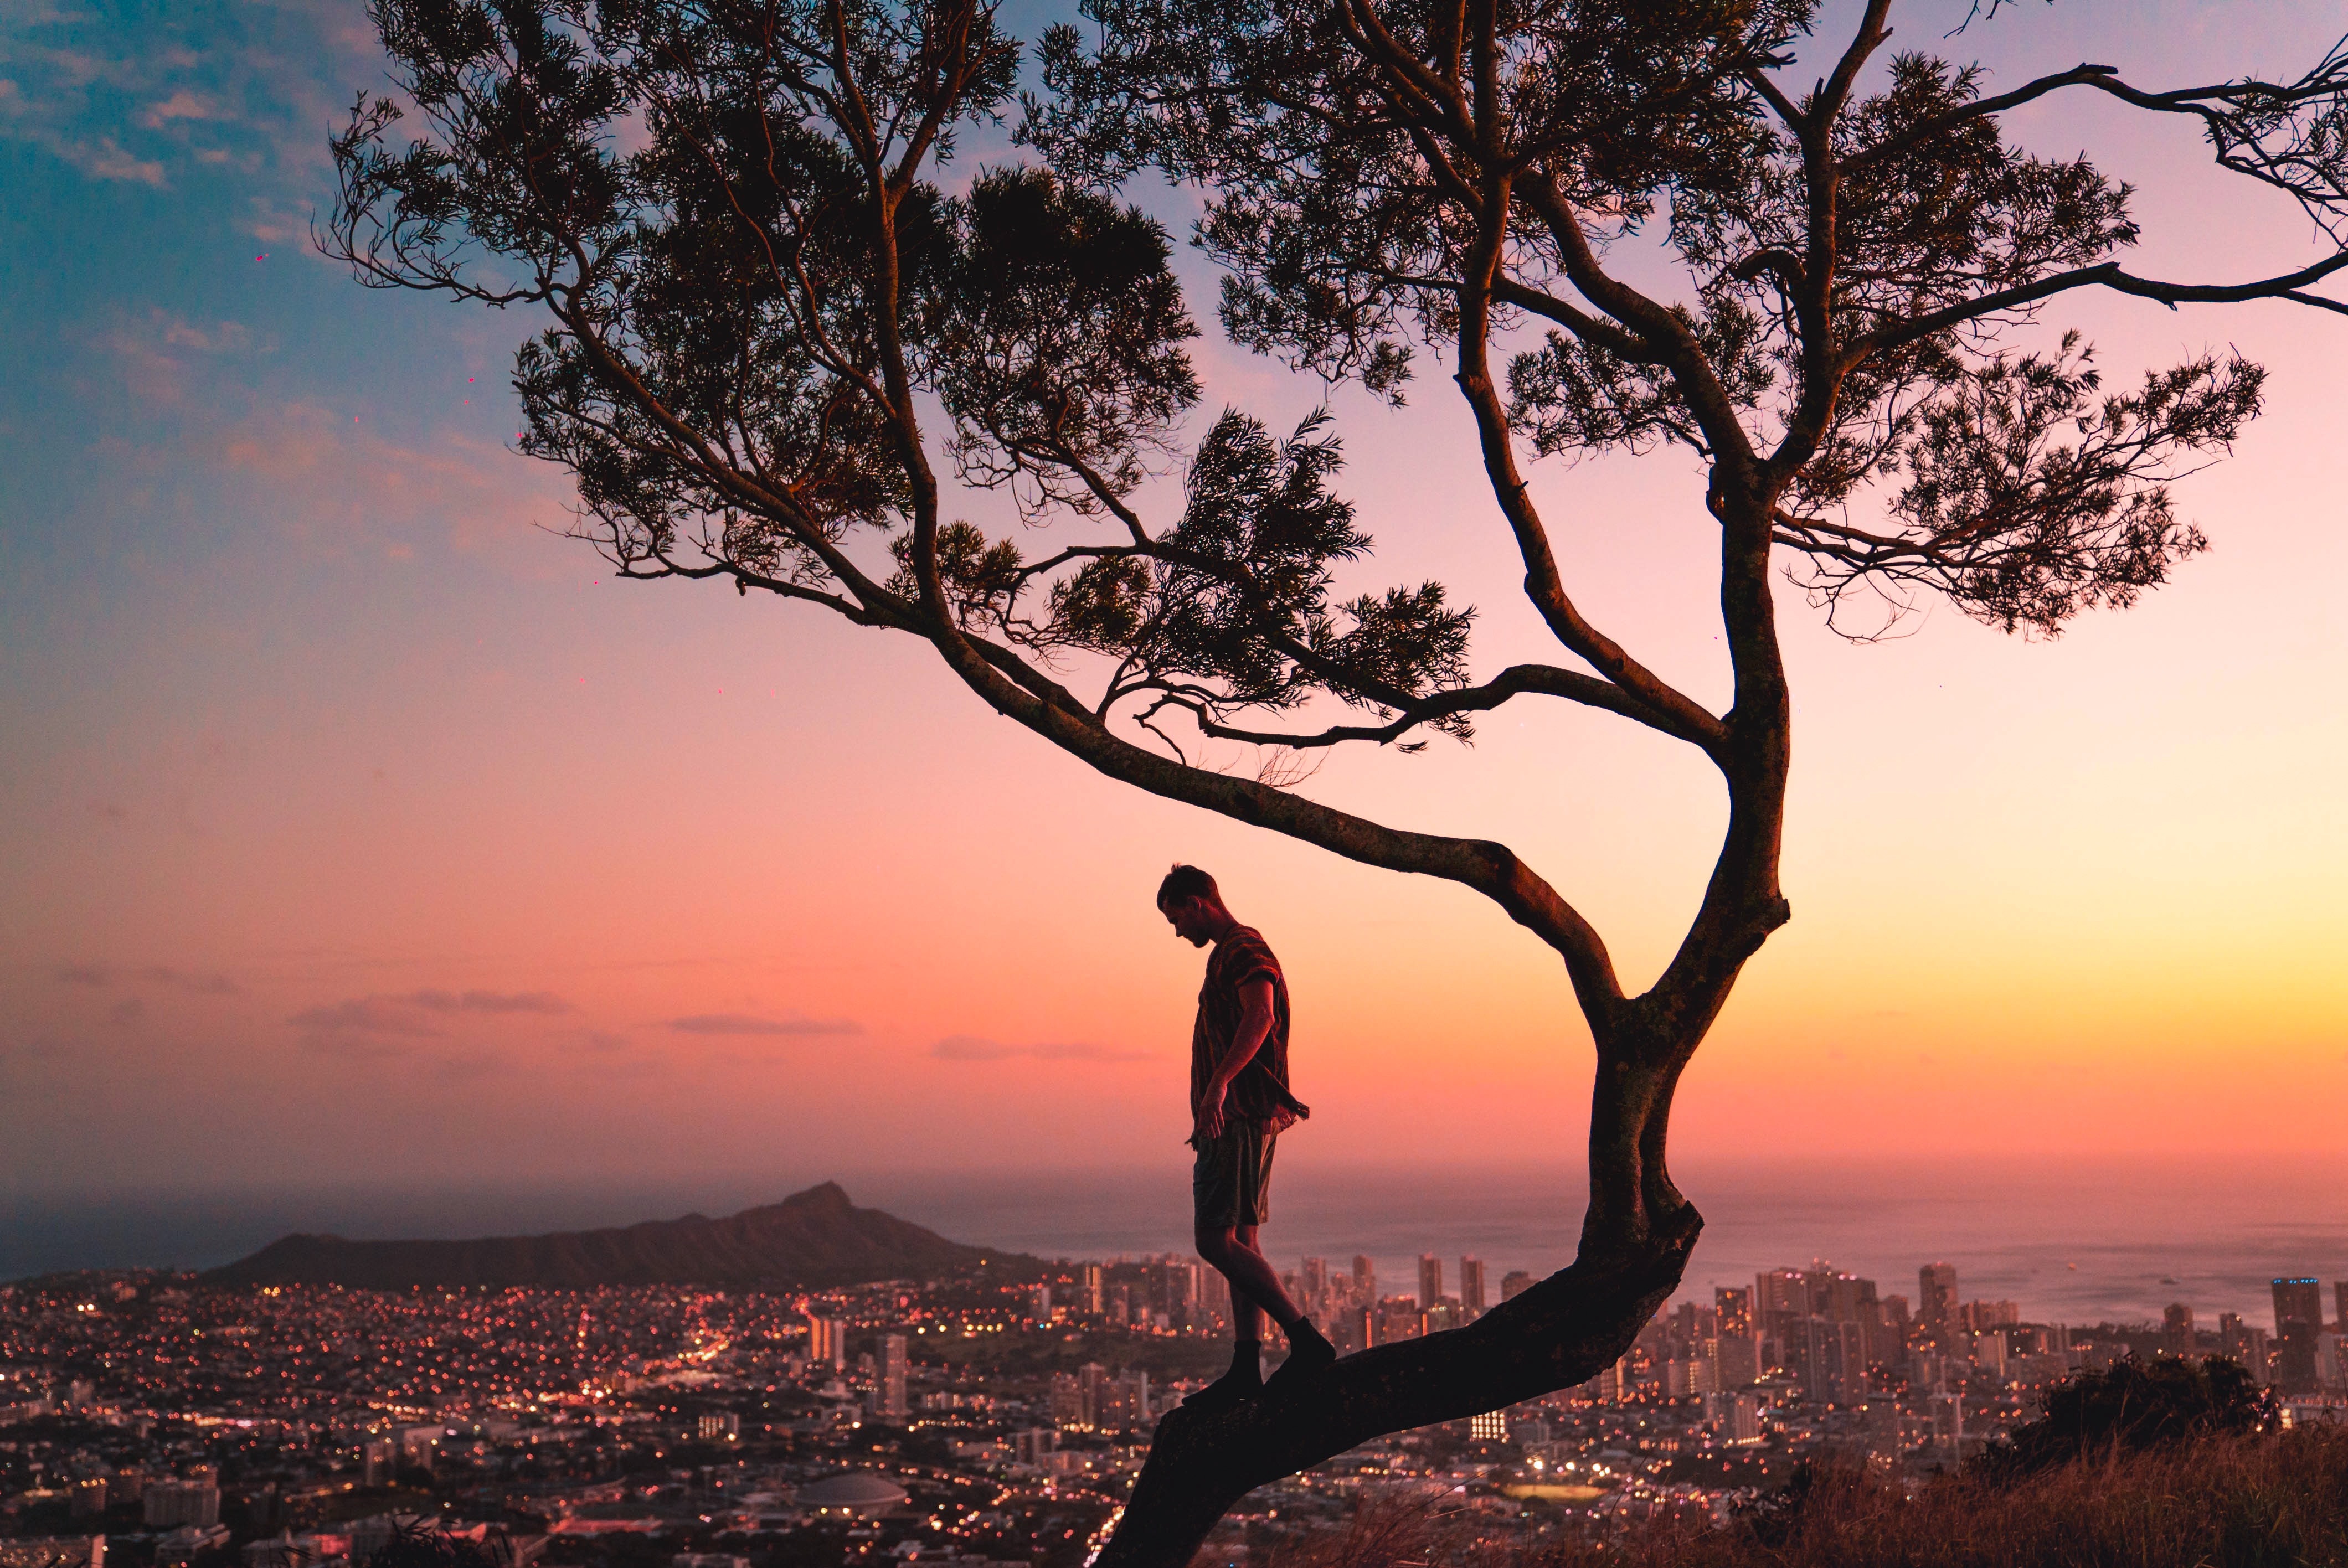 Man Walking Down from Tree at Sunset, Symbolizing Breaking Boundaries and Embracing Personal Growth.